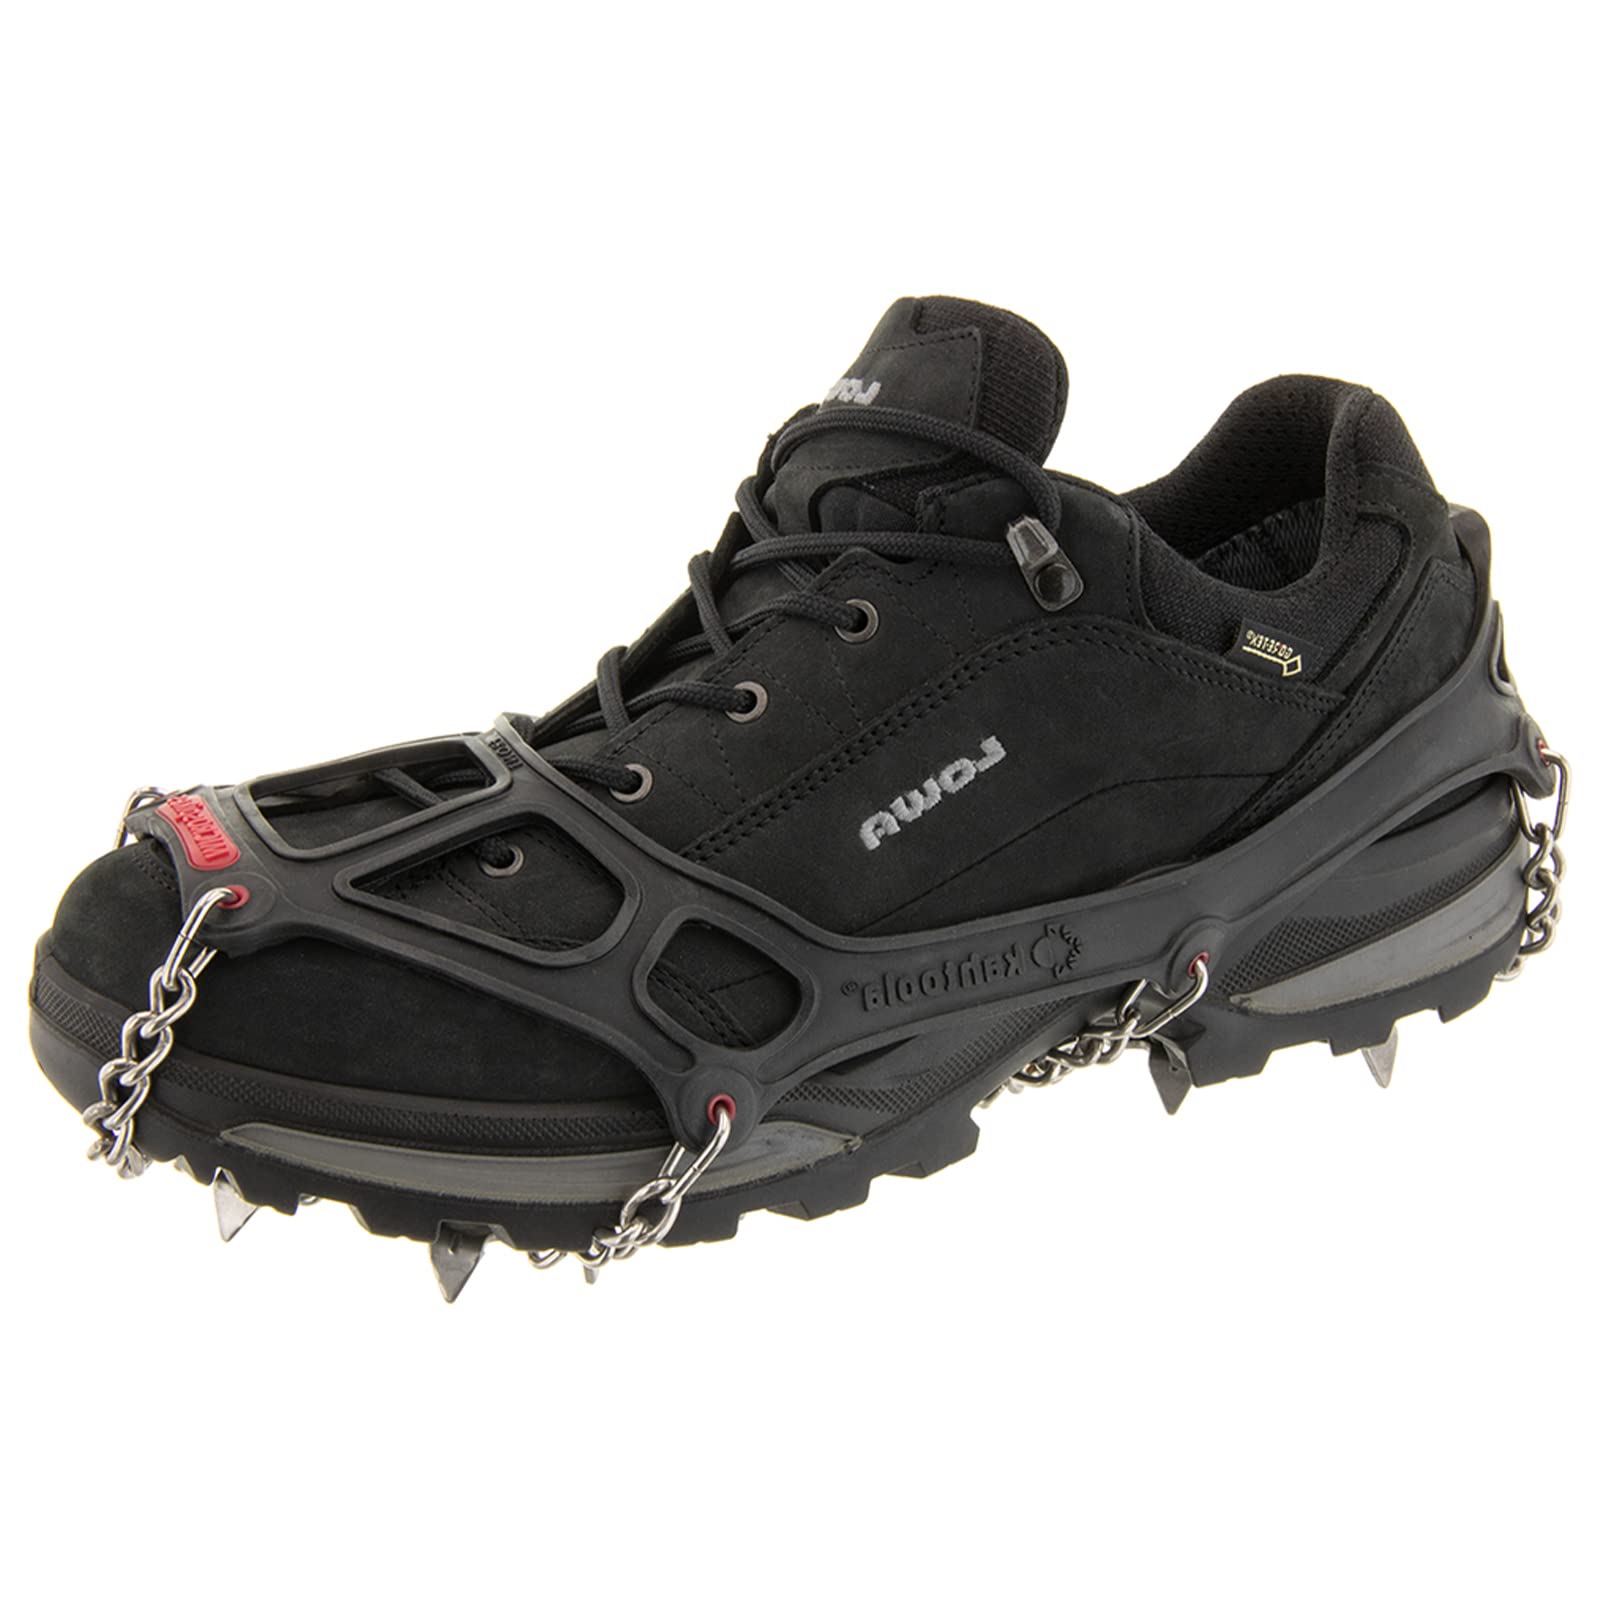 Kahtoola MICROspikes Footwear Traction for Winter Trail Hiking & Ice Mountaineering